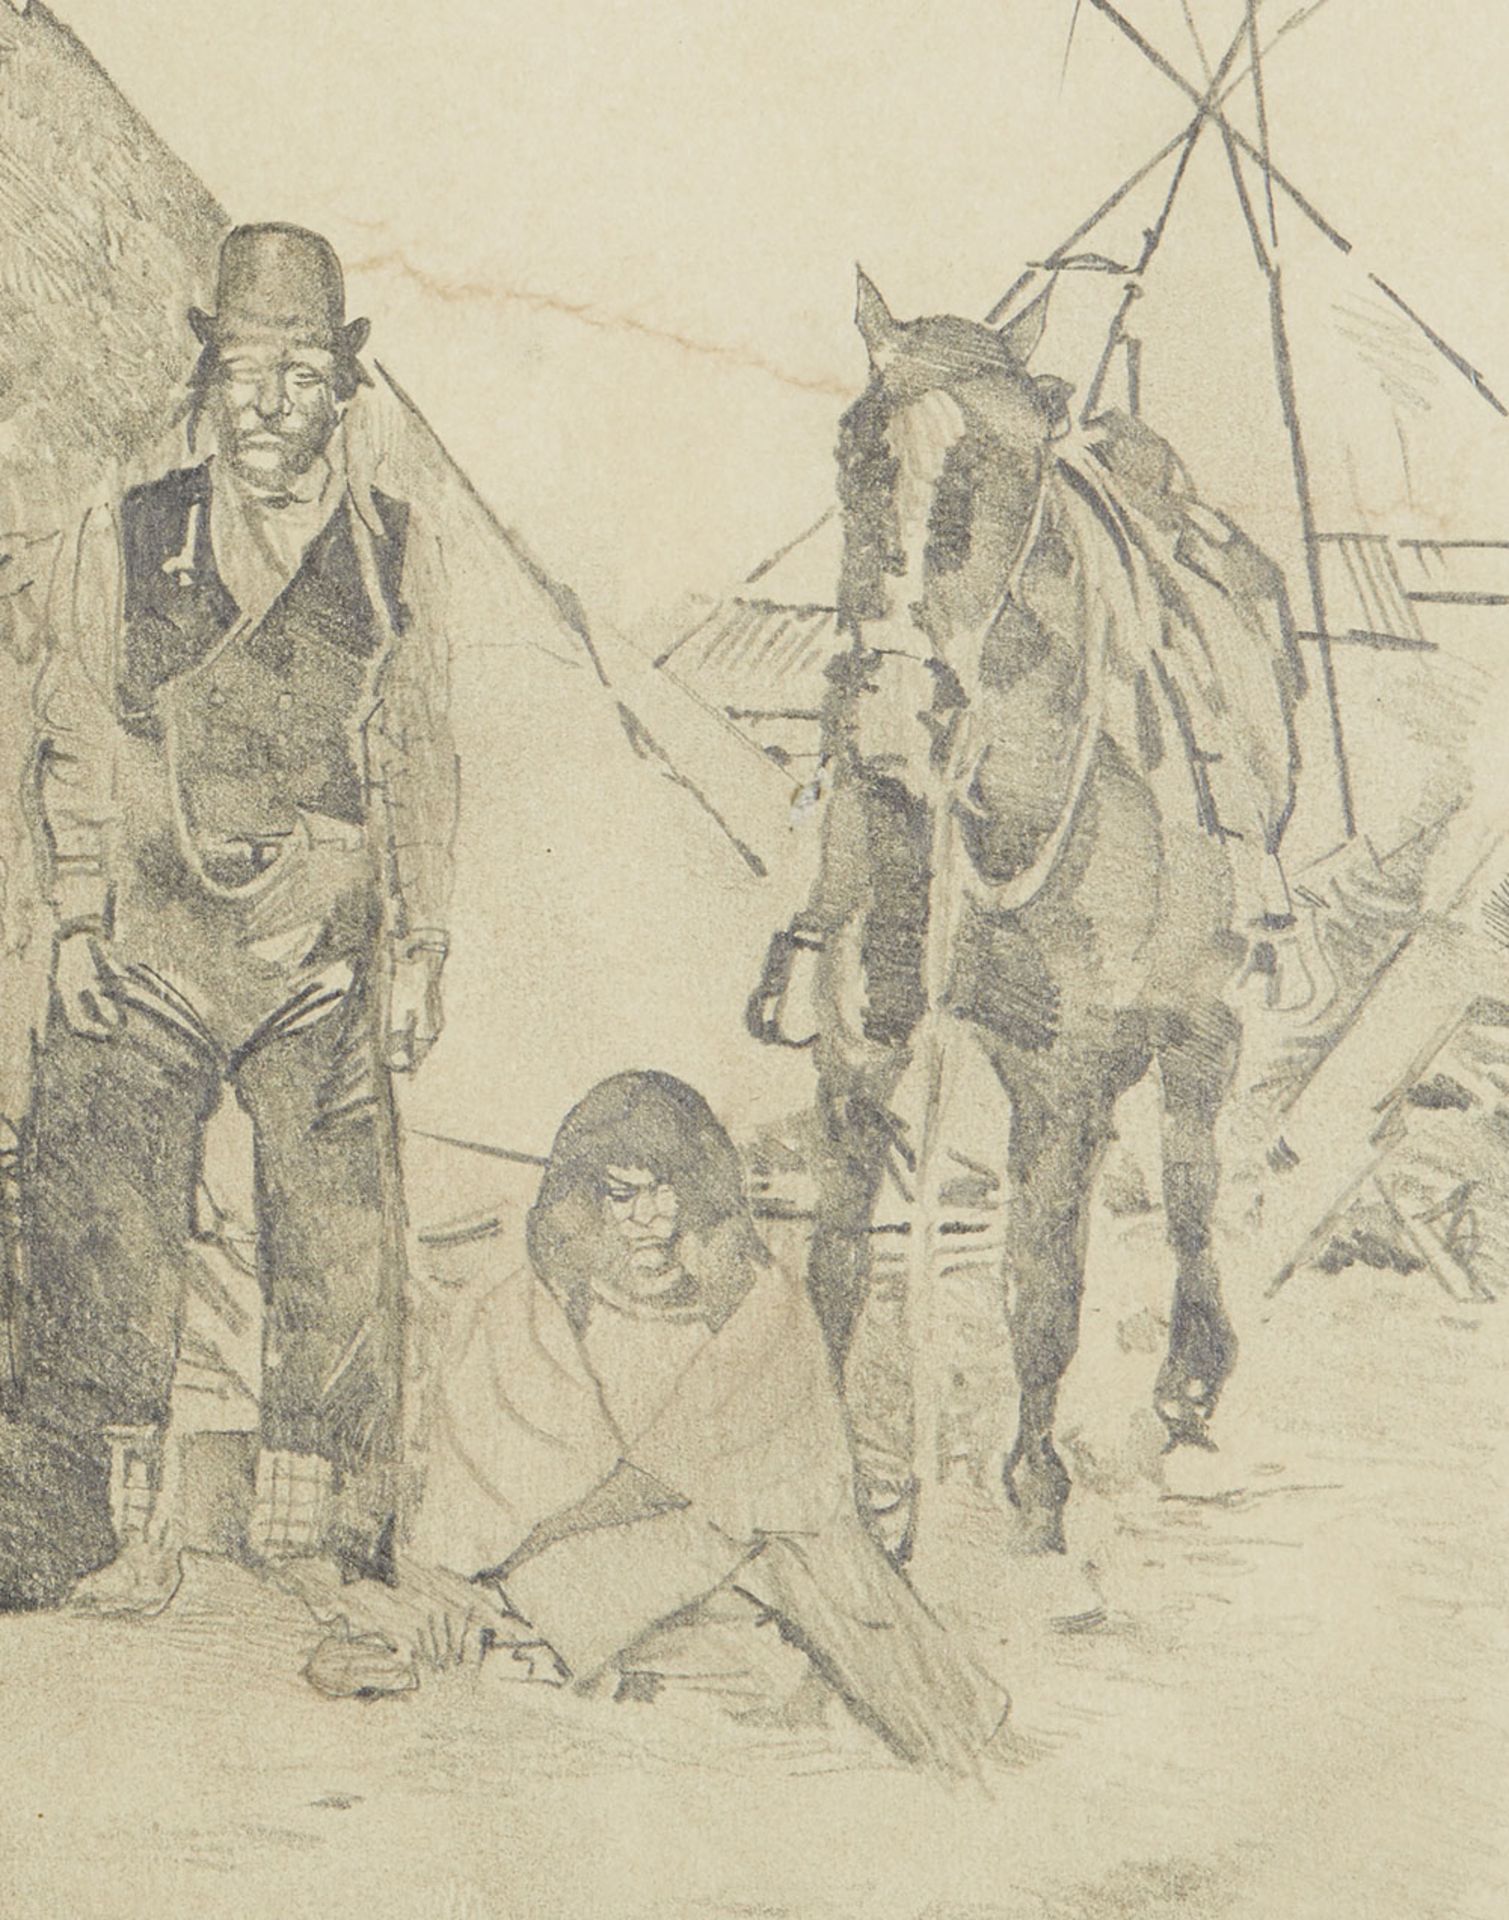 Campaign Drawing Of Native American Reservation 19Th/20Th C. - Image 4 of 5